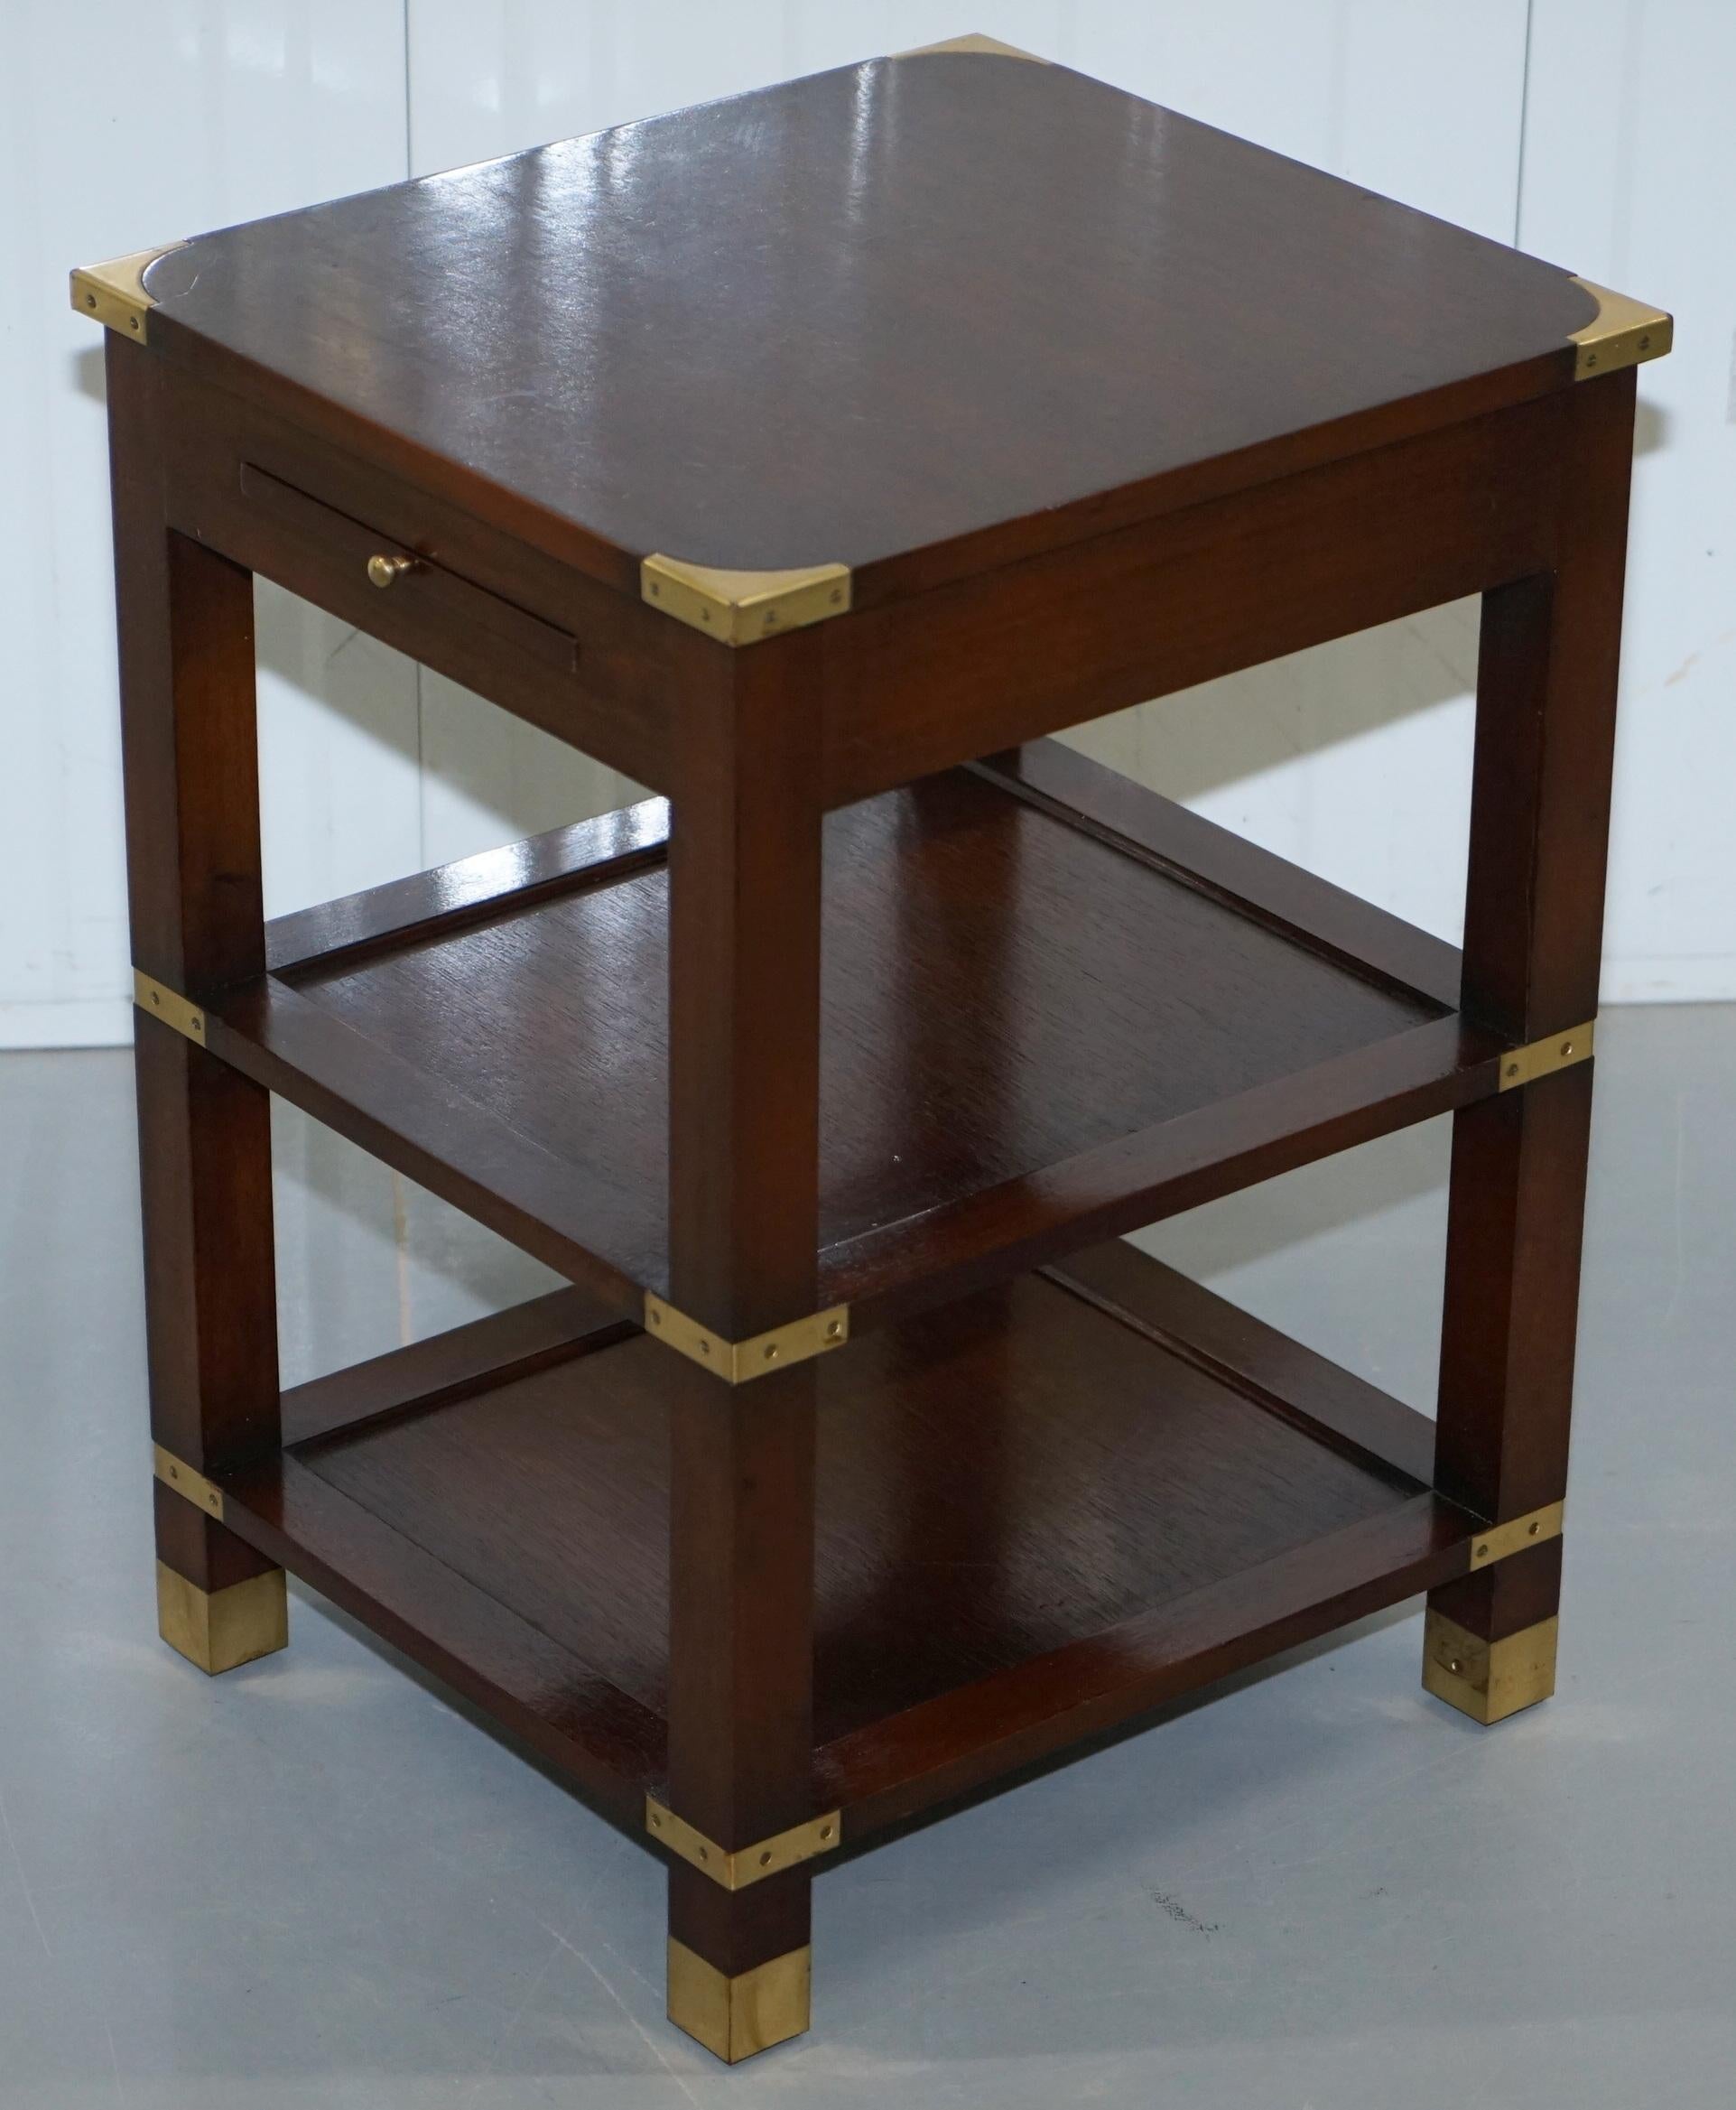 We are delighted to offer for sale this lovely Harrods London Kennedy furniture side lamp table with leather-topped butlers drinks serving tray

Kennedy Furniture is all handmade in Ipswich to order, they are Harrods oldest concession have